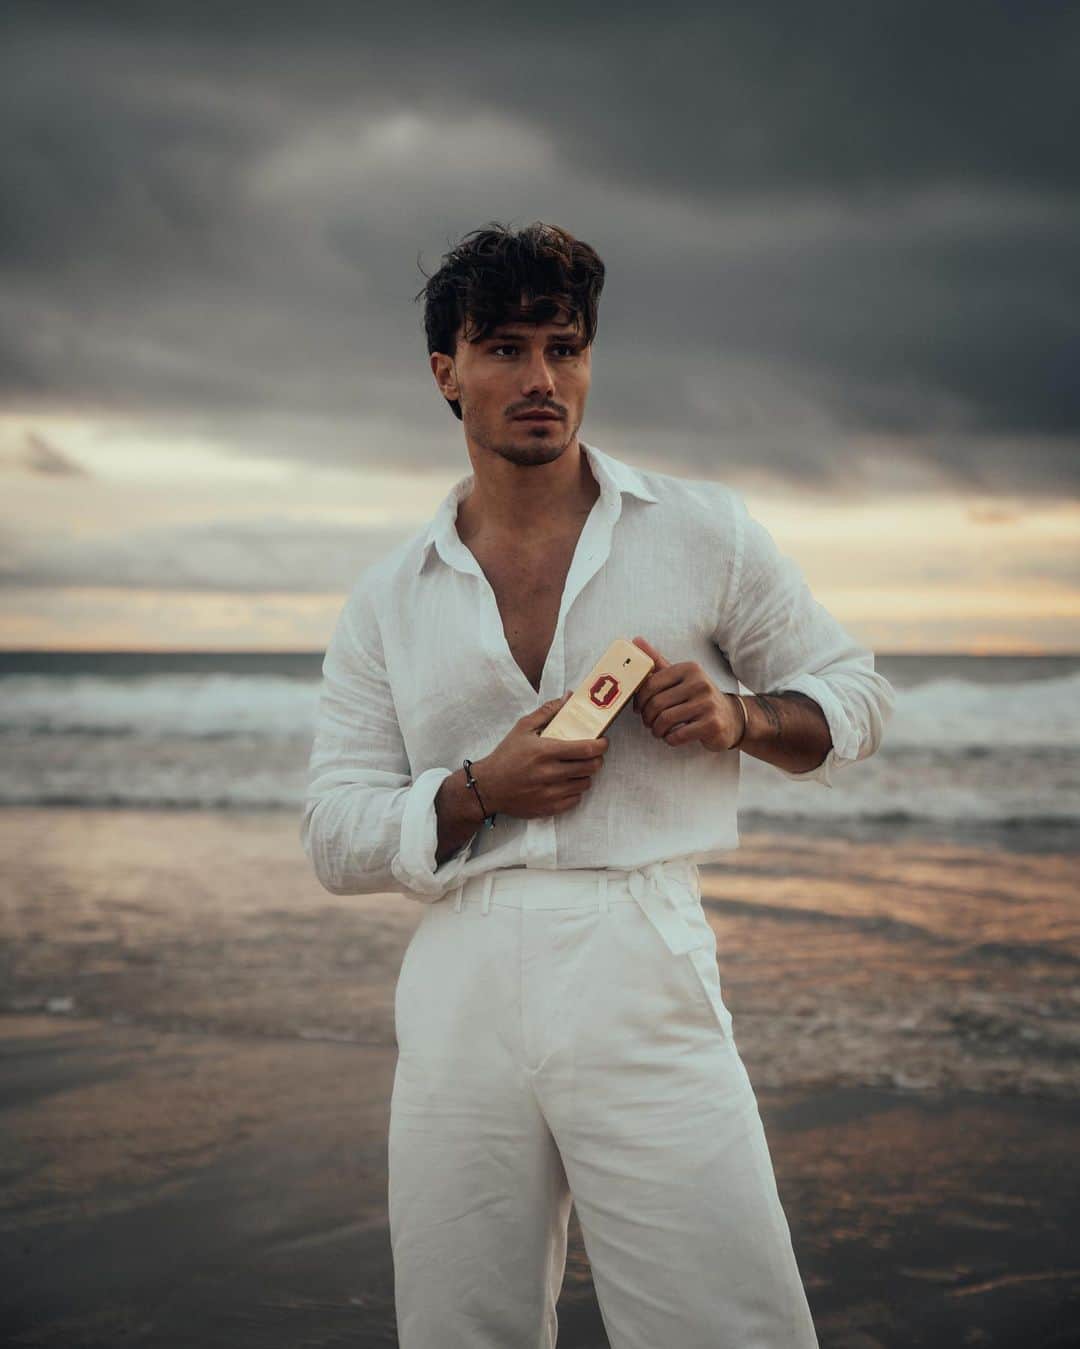 Enzo Cariniのインスタグラム：「Capturing memories of travel and exploration with the new Paco Rabanne 1 Million Royal @pacorabanne #onemillionroyal #flyingwithpacorabanne #beroyal」